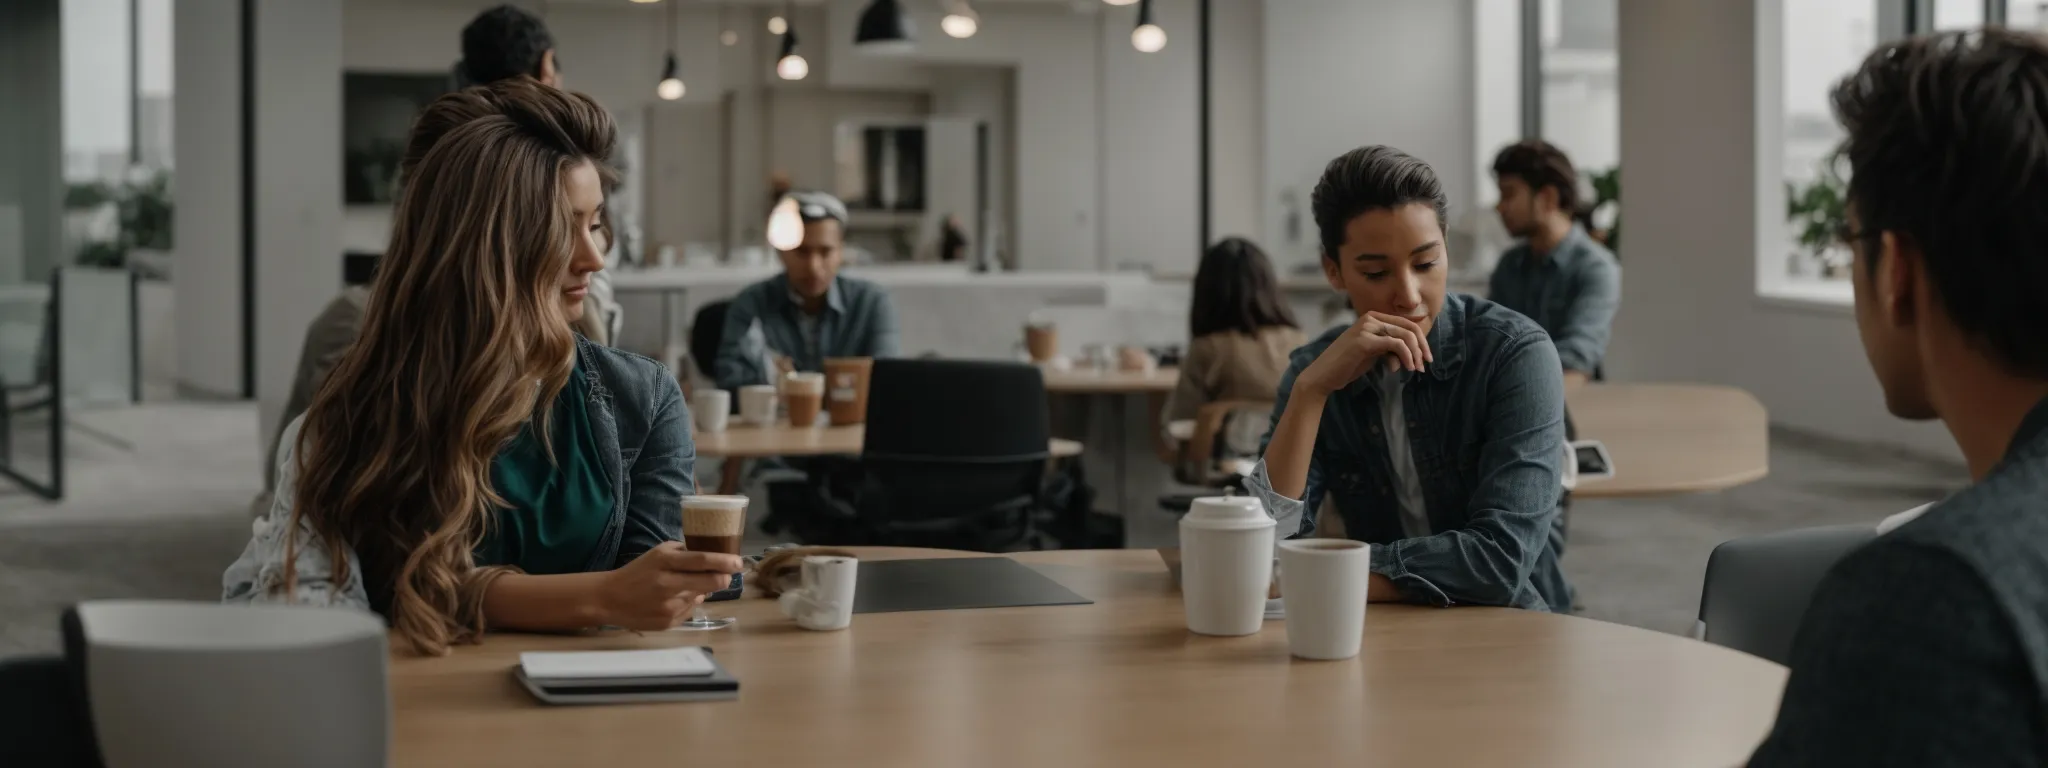 a content strategist and an seo expert discuss strategies over a coffee at a minimalist-designed workspace, with a clear focus on a collaborative environment devoid of clutter.